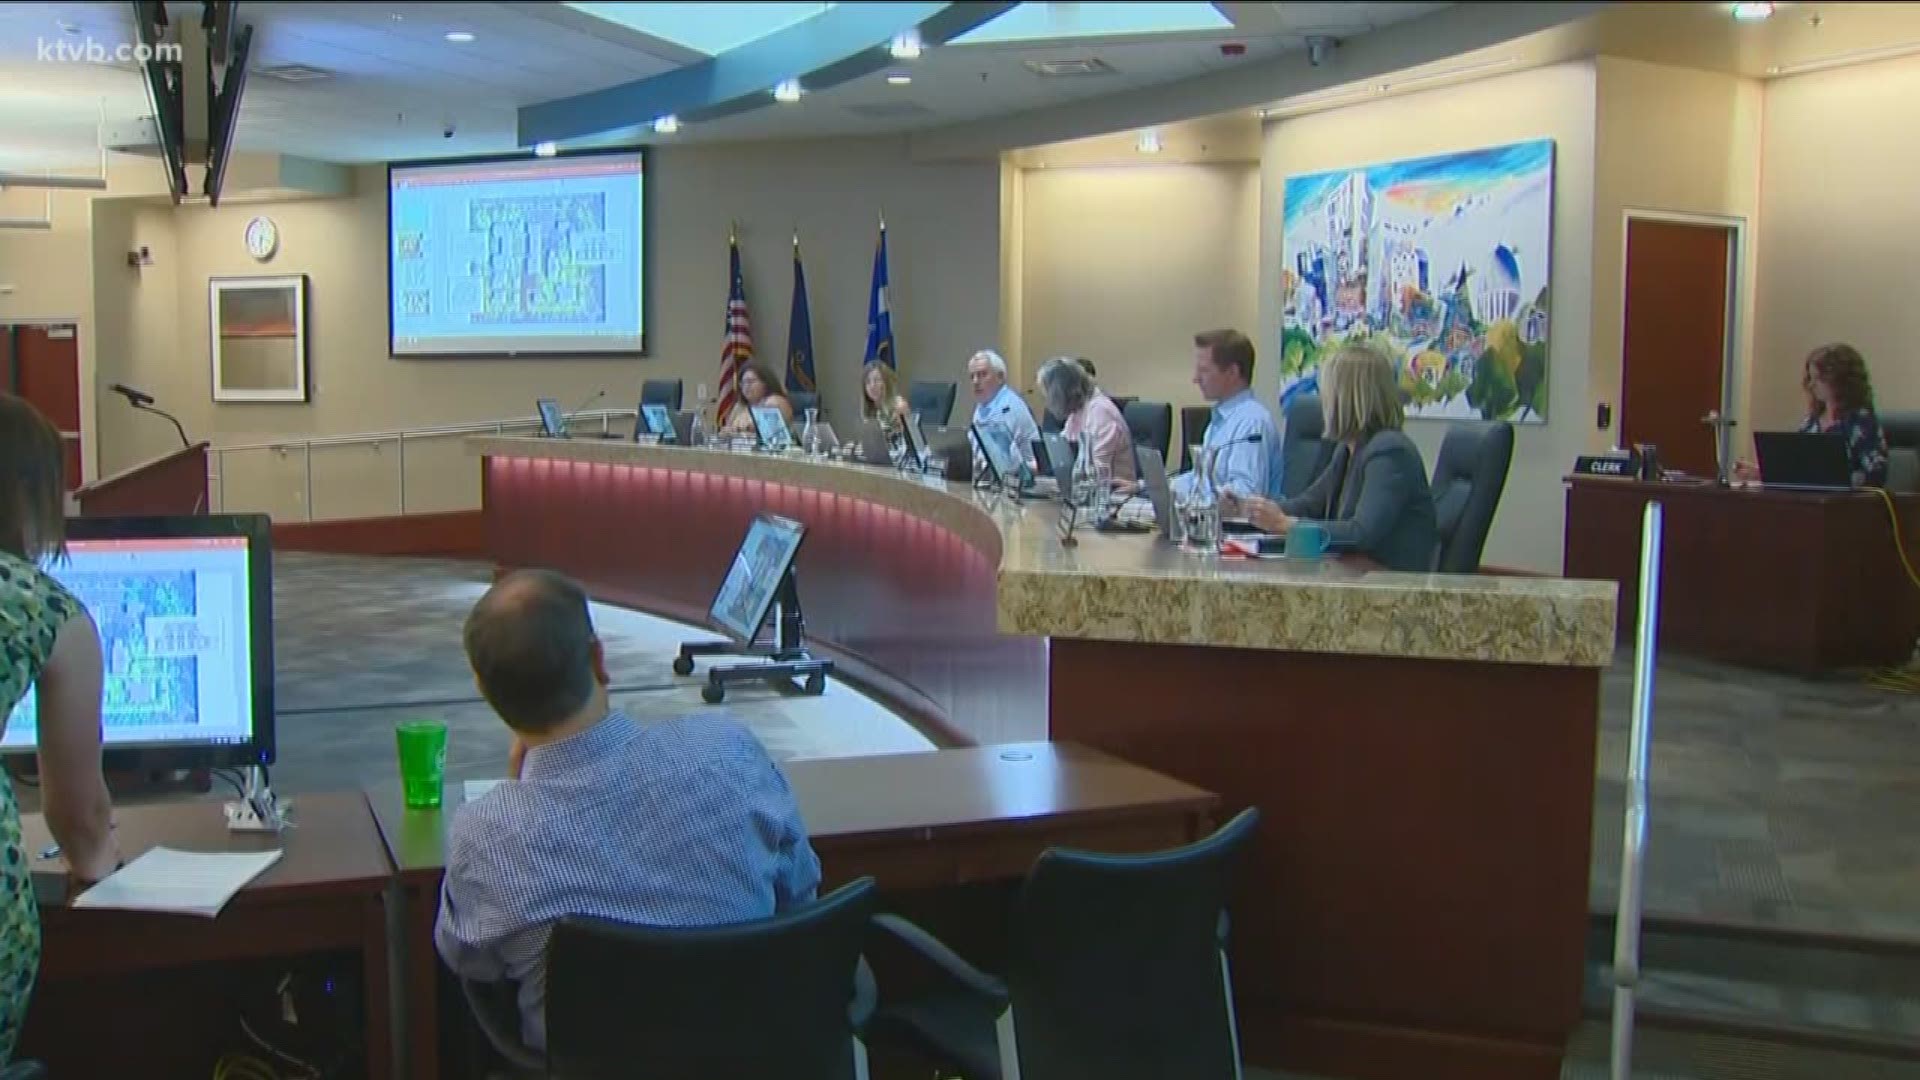 Boise residents weighed in on the city's proposed 2020 budget, which includes a 3% property tax increase - the maximum allowed under Idaho law.